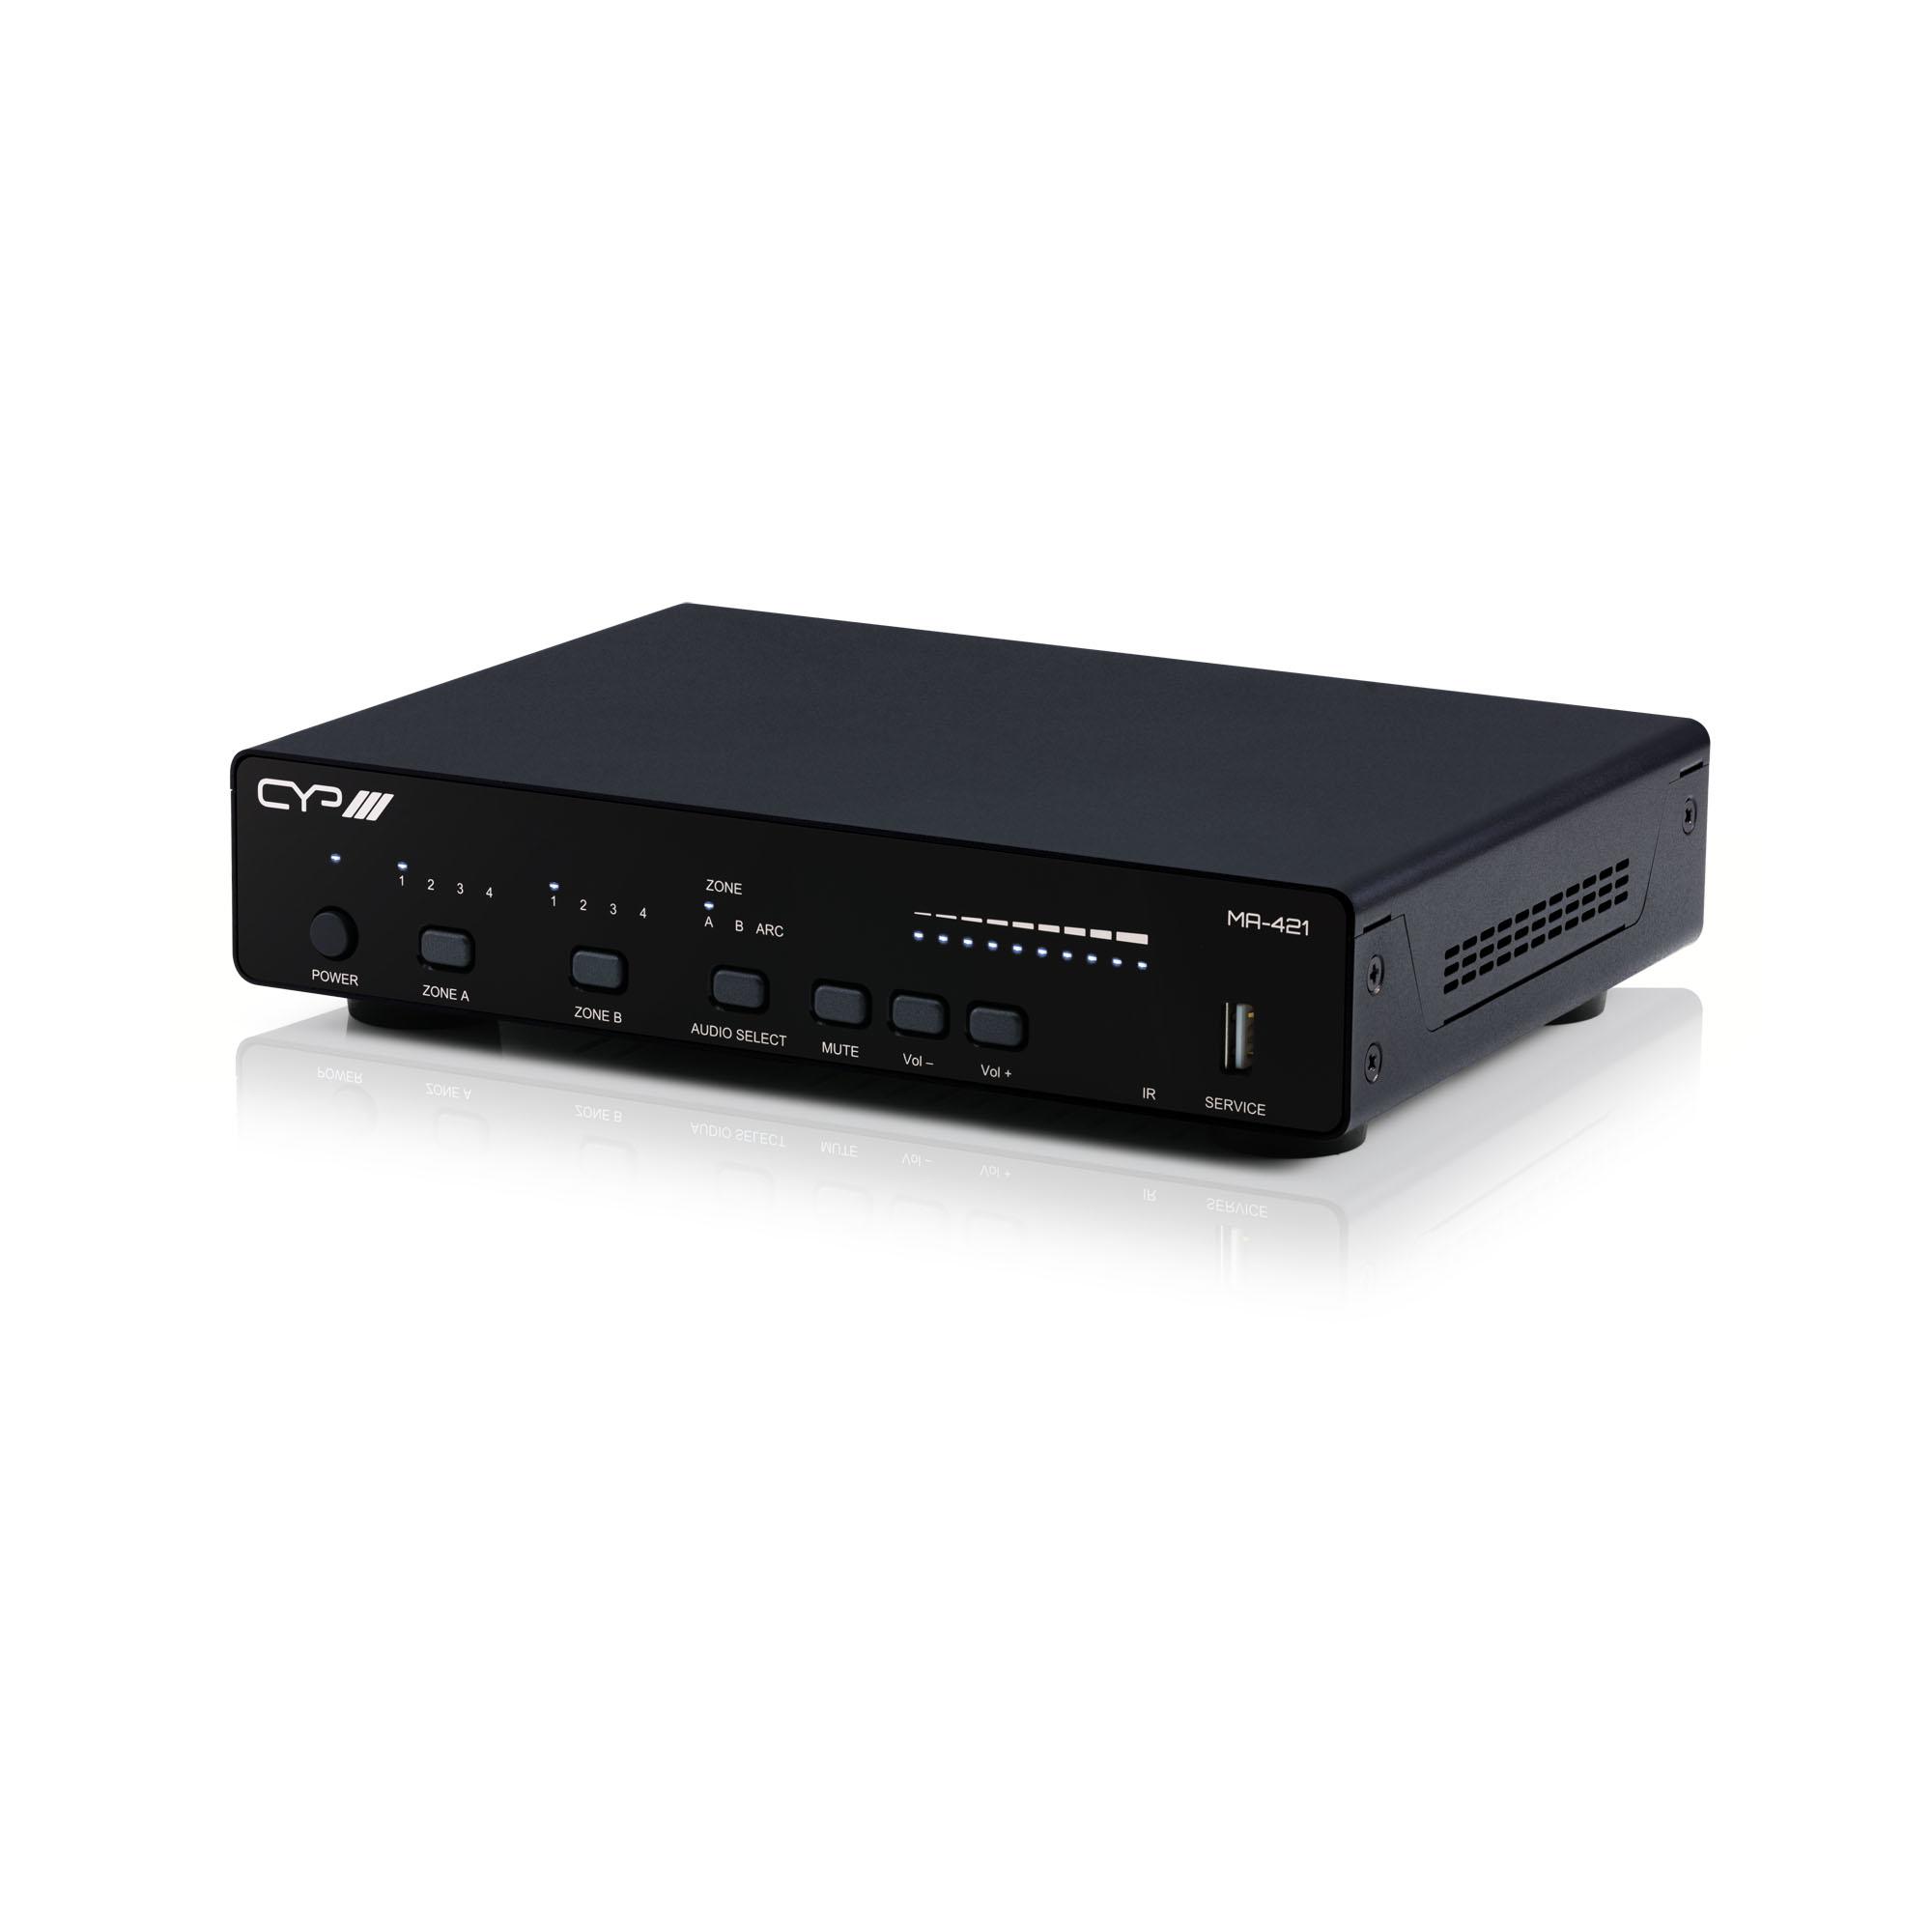 MA-421 4 In 2 HDBaseT Out + HDMI Out Matrix Amplifier with AVLC, 2x20w, Output Scaling, 4KHDR, App Control, 1 x PUV-1710RX-AVLC